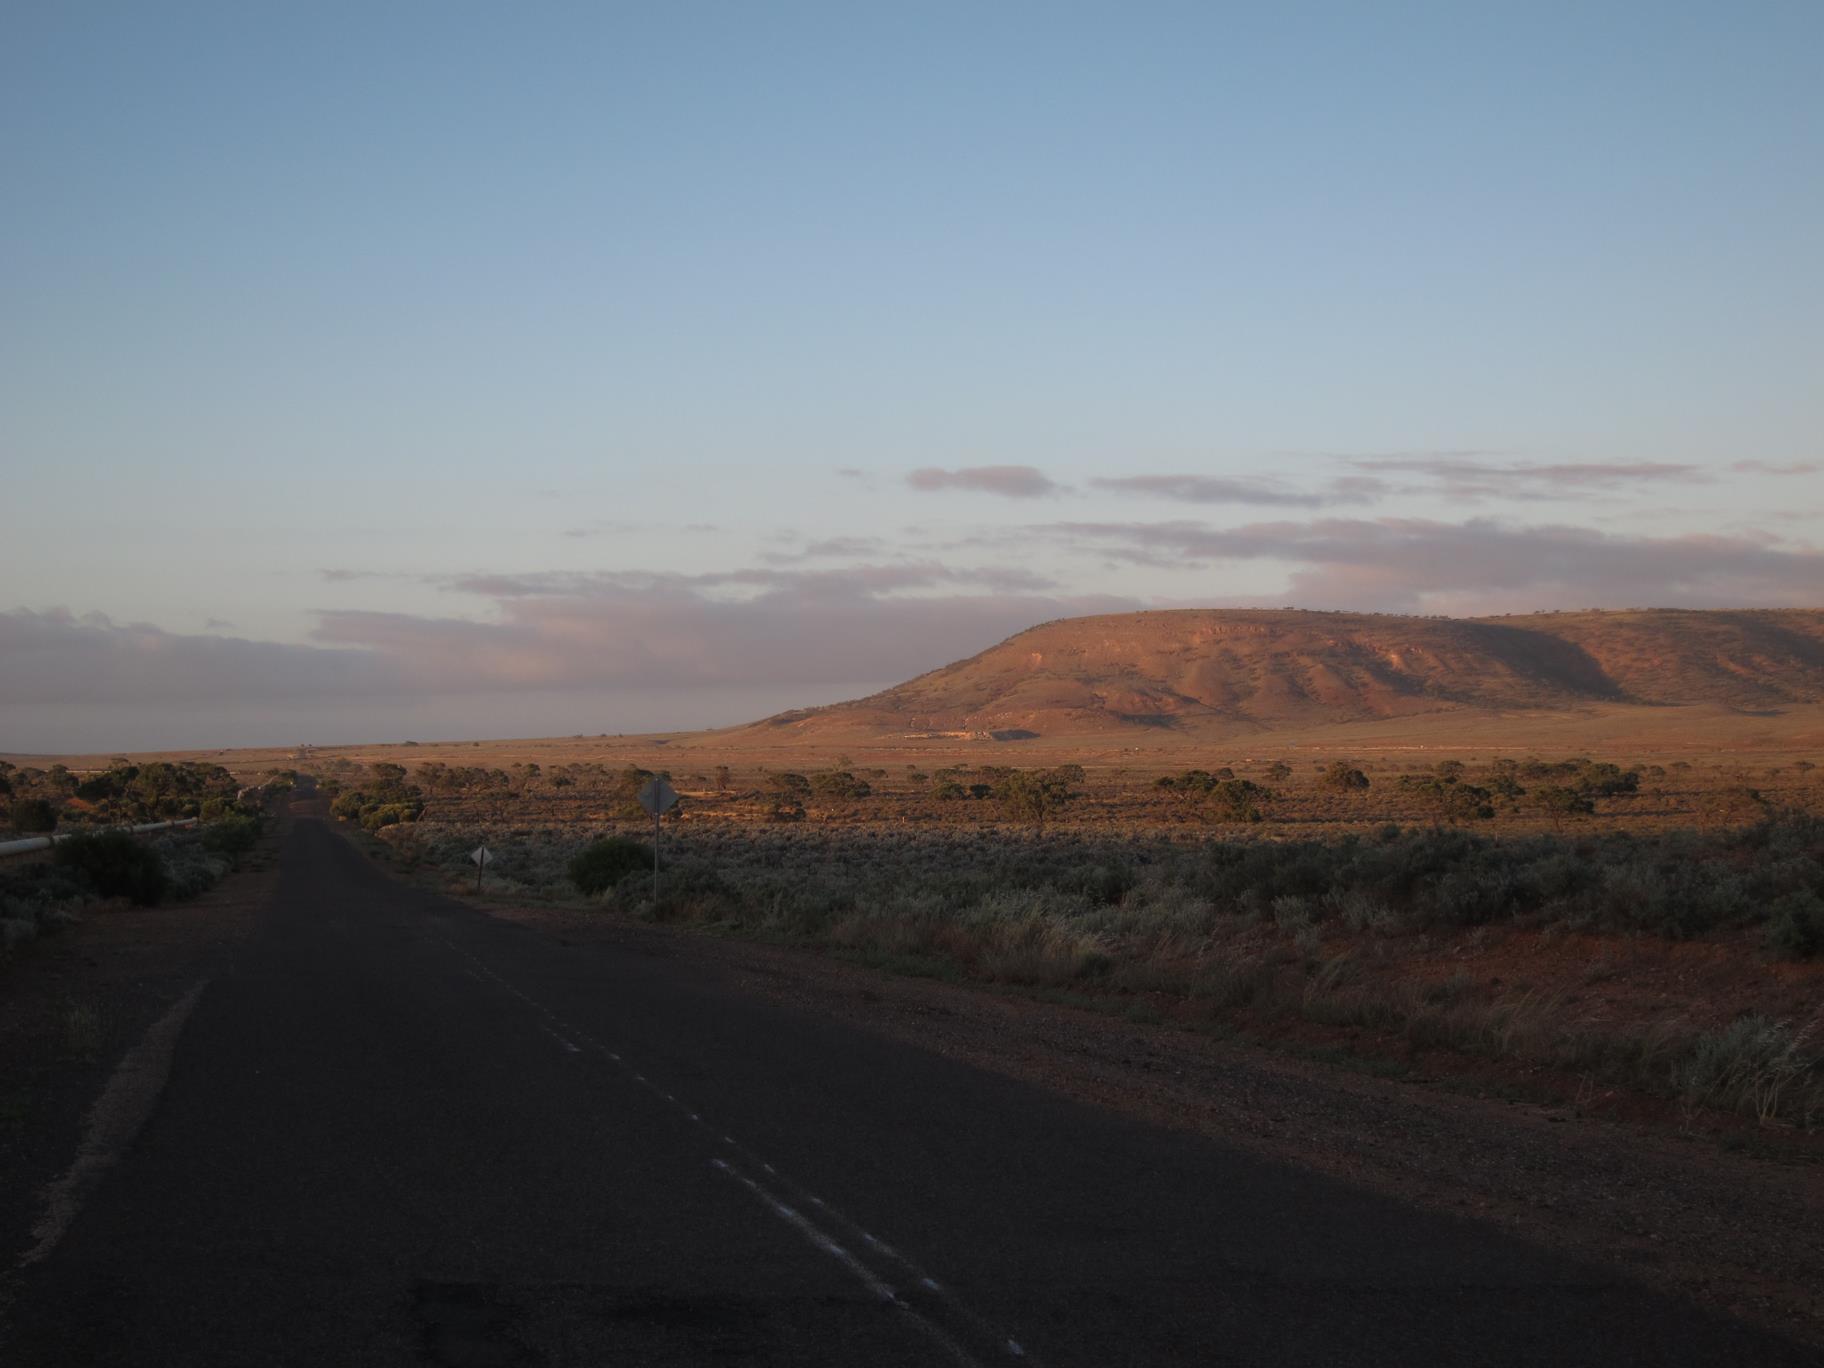 Hills near Port Augusta, some of the last I would see for another 2000 kms